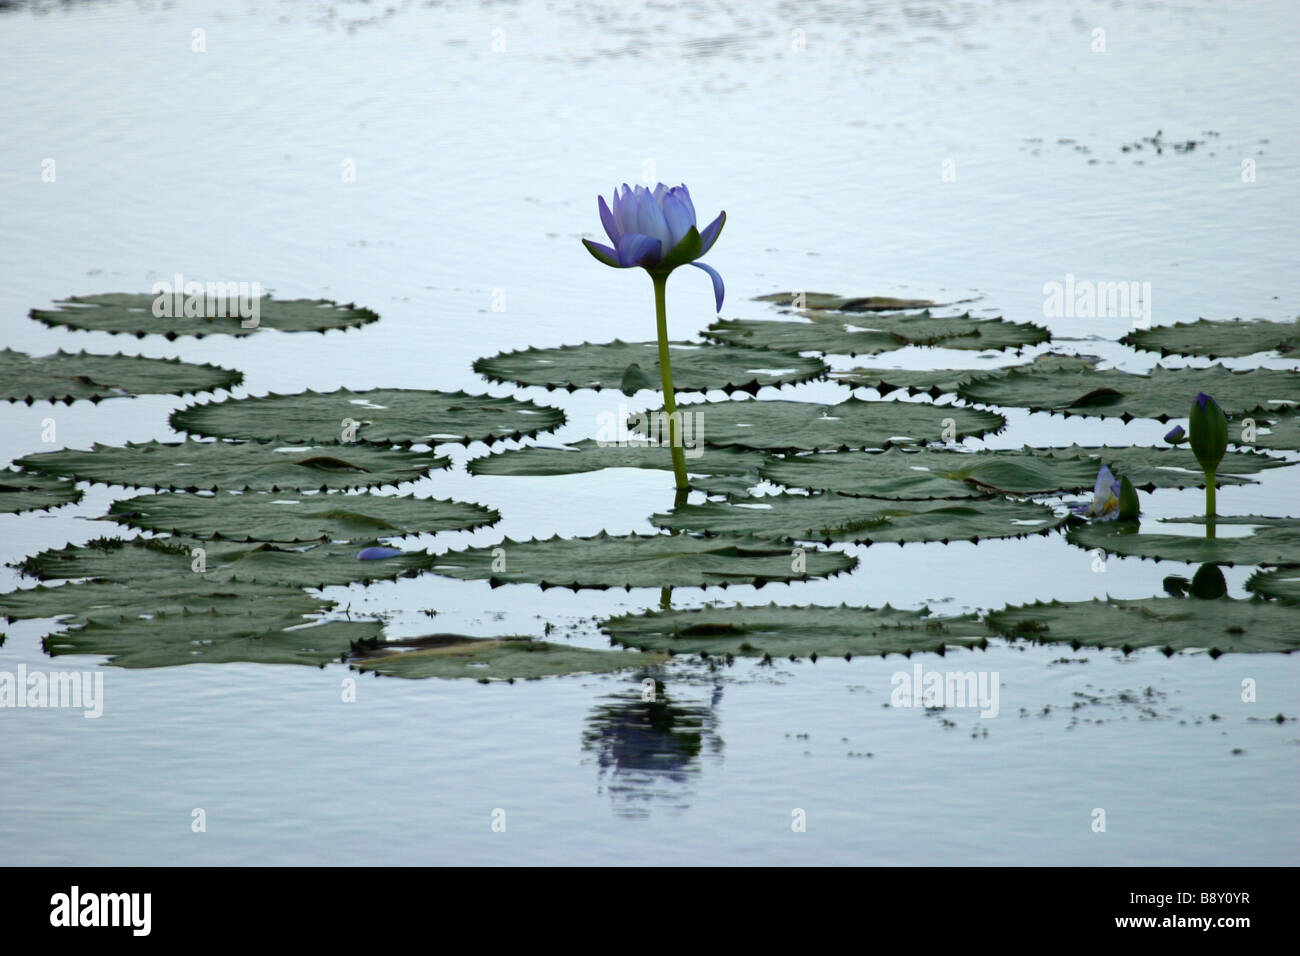 A single lily flower surrounded by lily pads from the coast of central Queensland, Australia Stock Photo